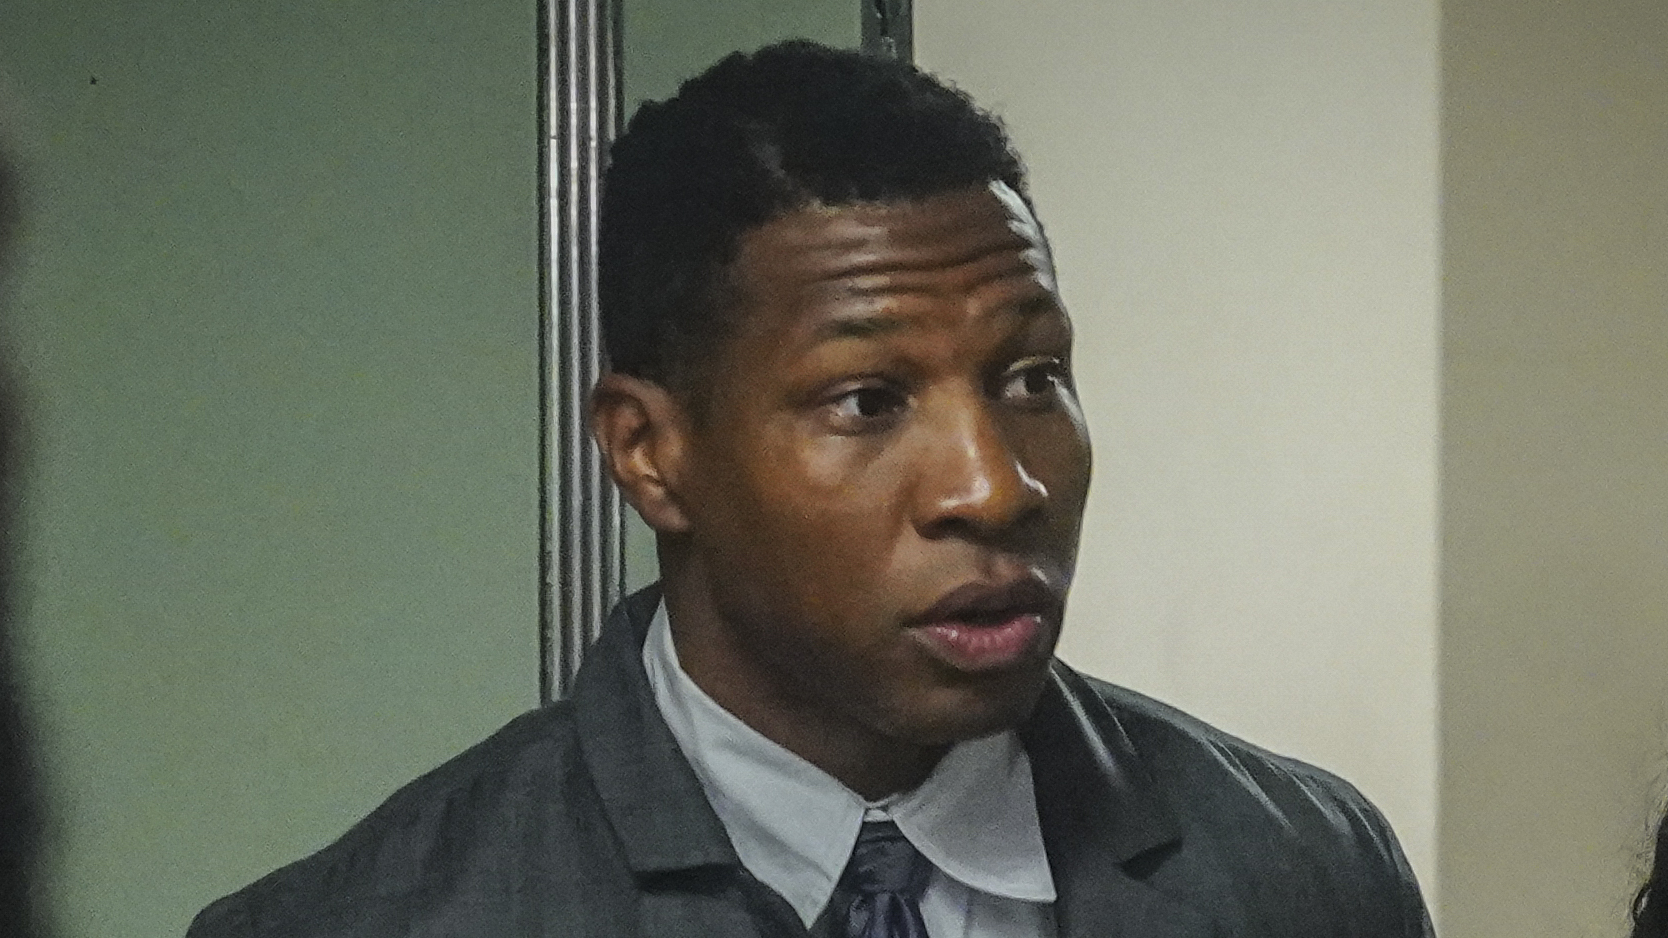 Jury deliberations begin in the trial of actor Jonathan Majors